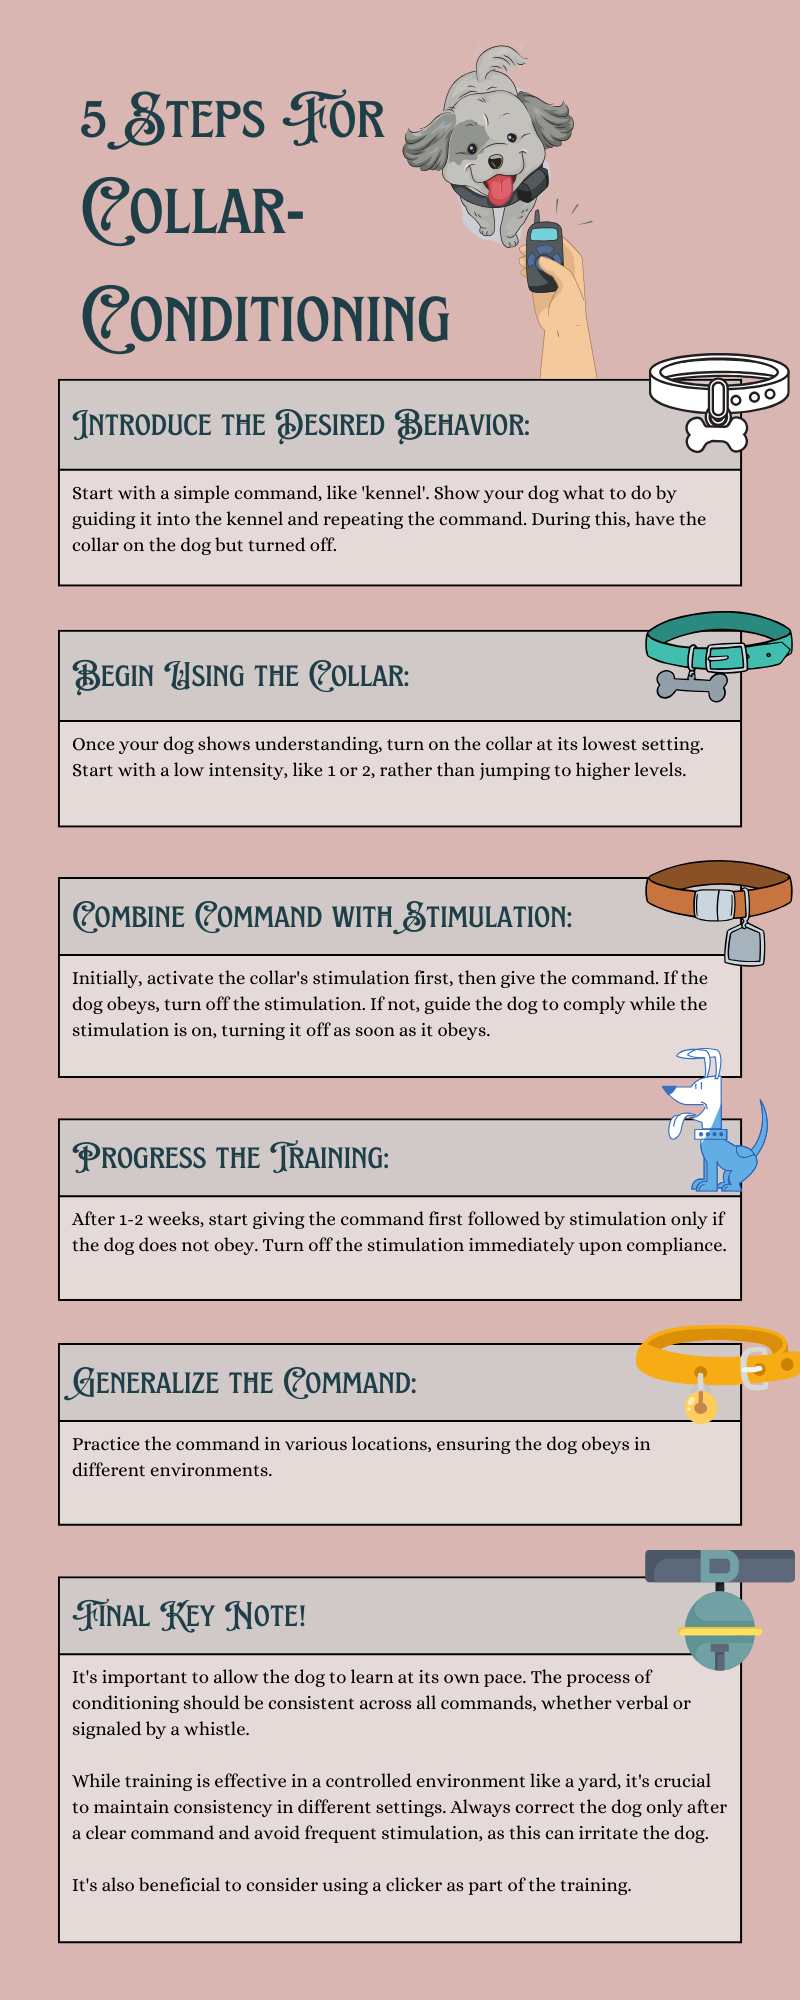 Steps for Collar-Conditioning